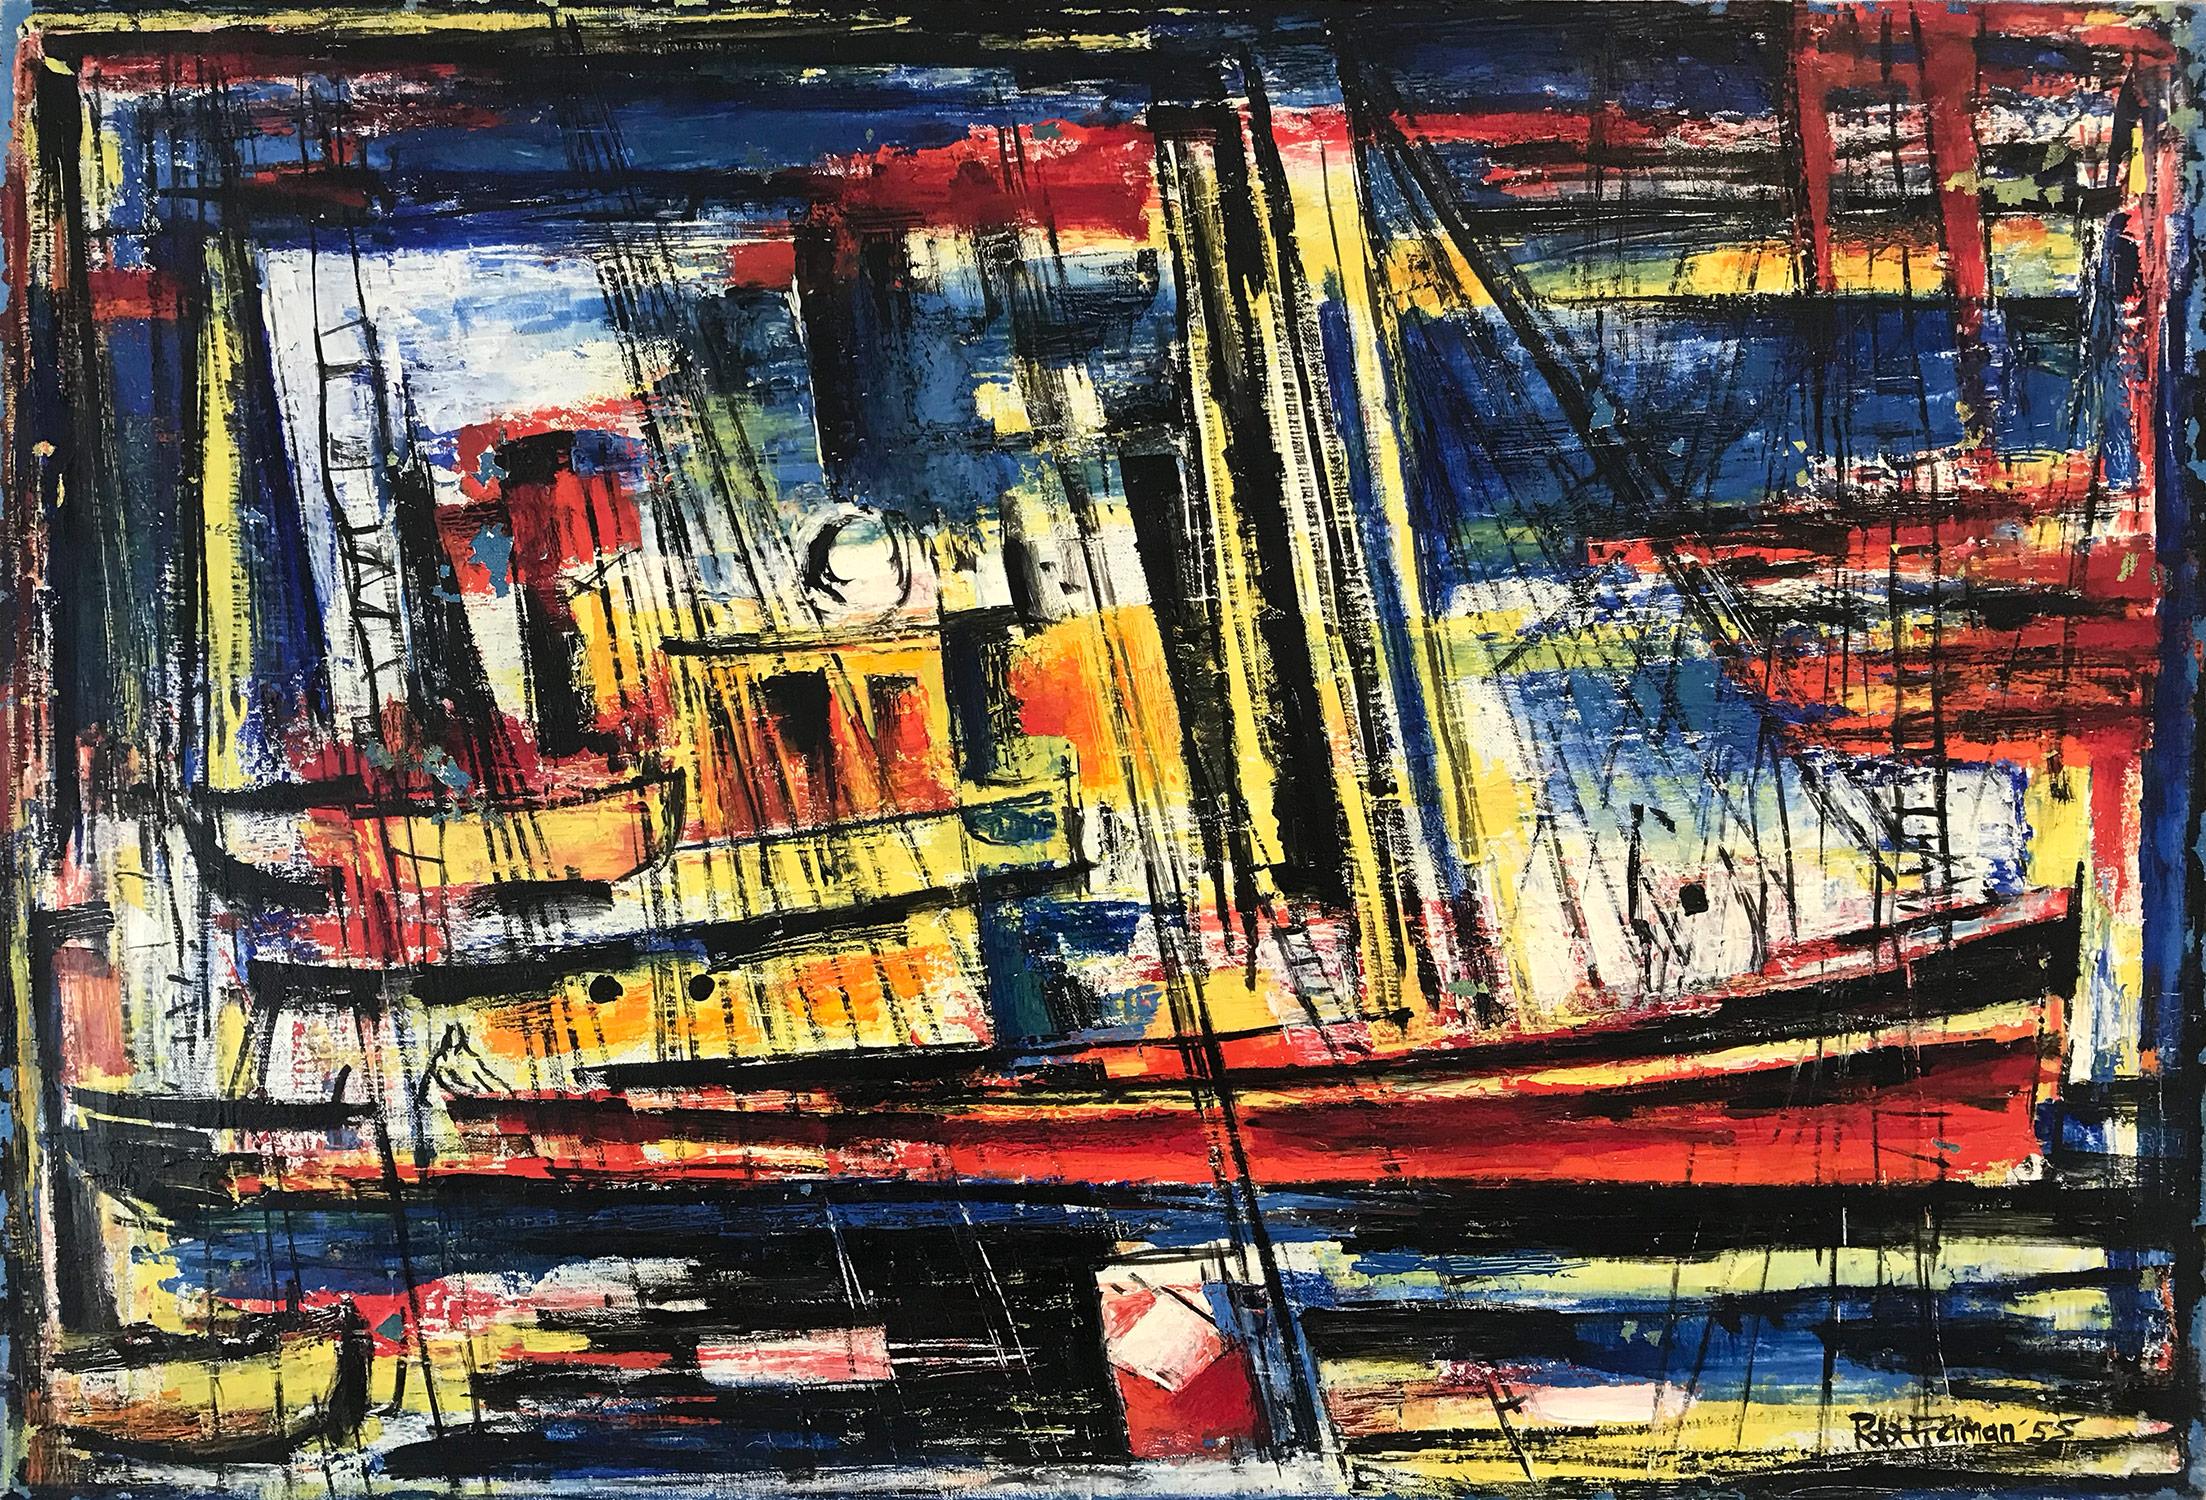 "The Freighter" Mid Century Oil Painting on Canvas Abstract Marina with Boats